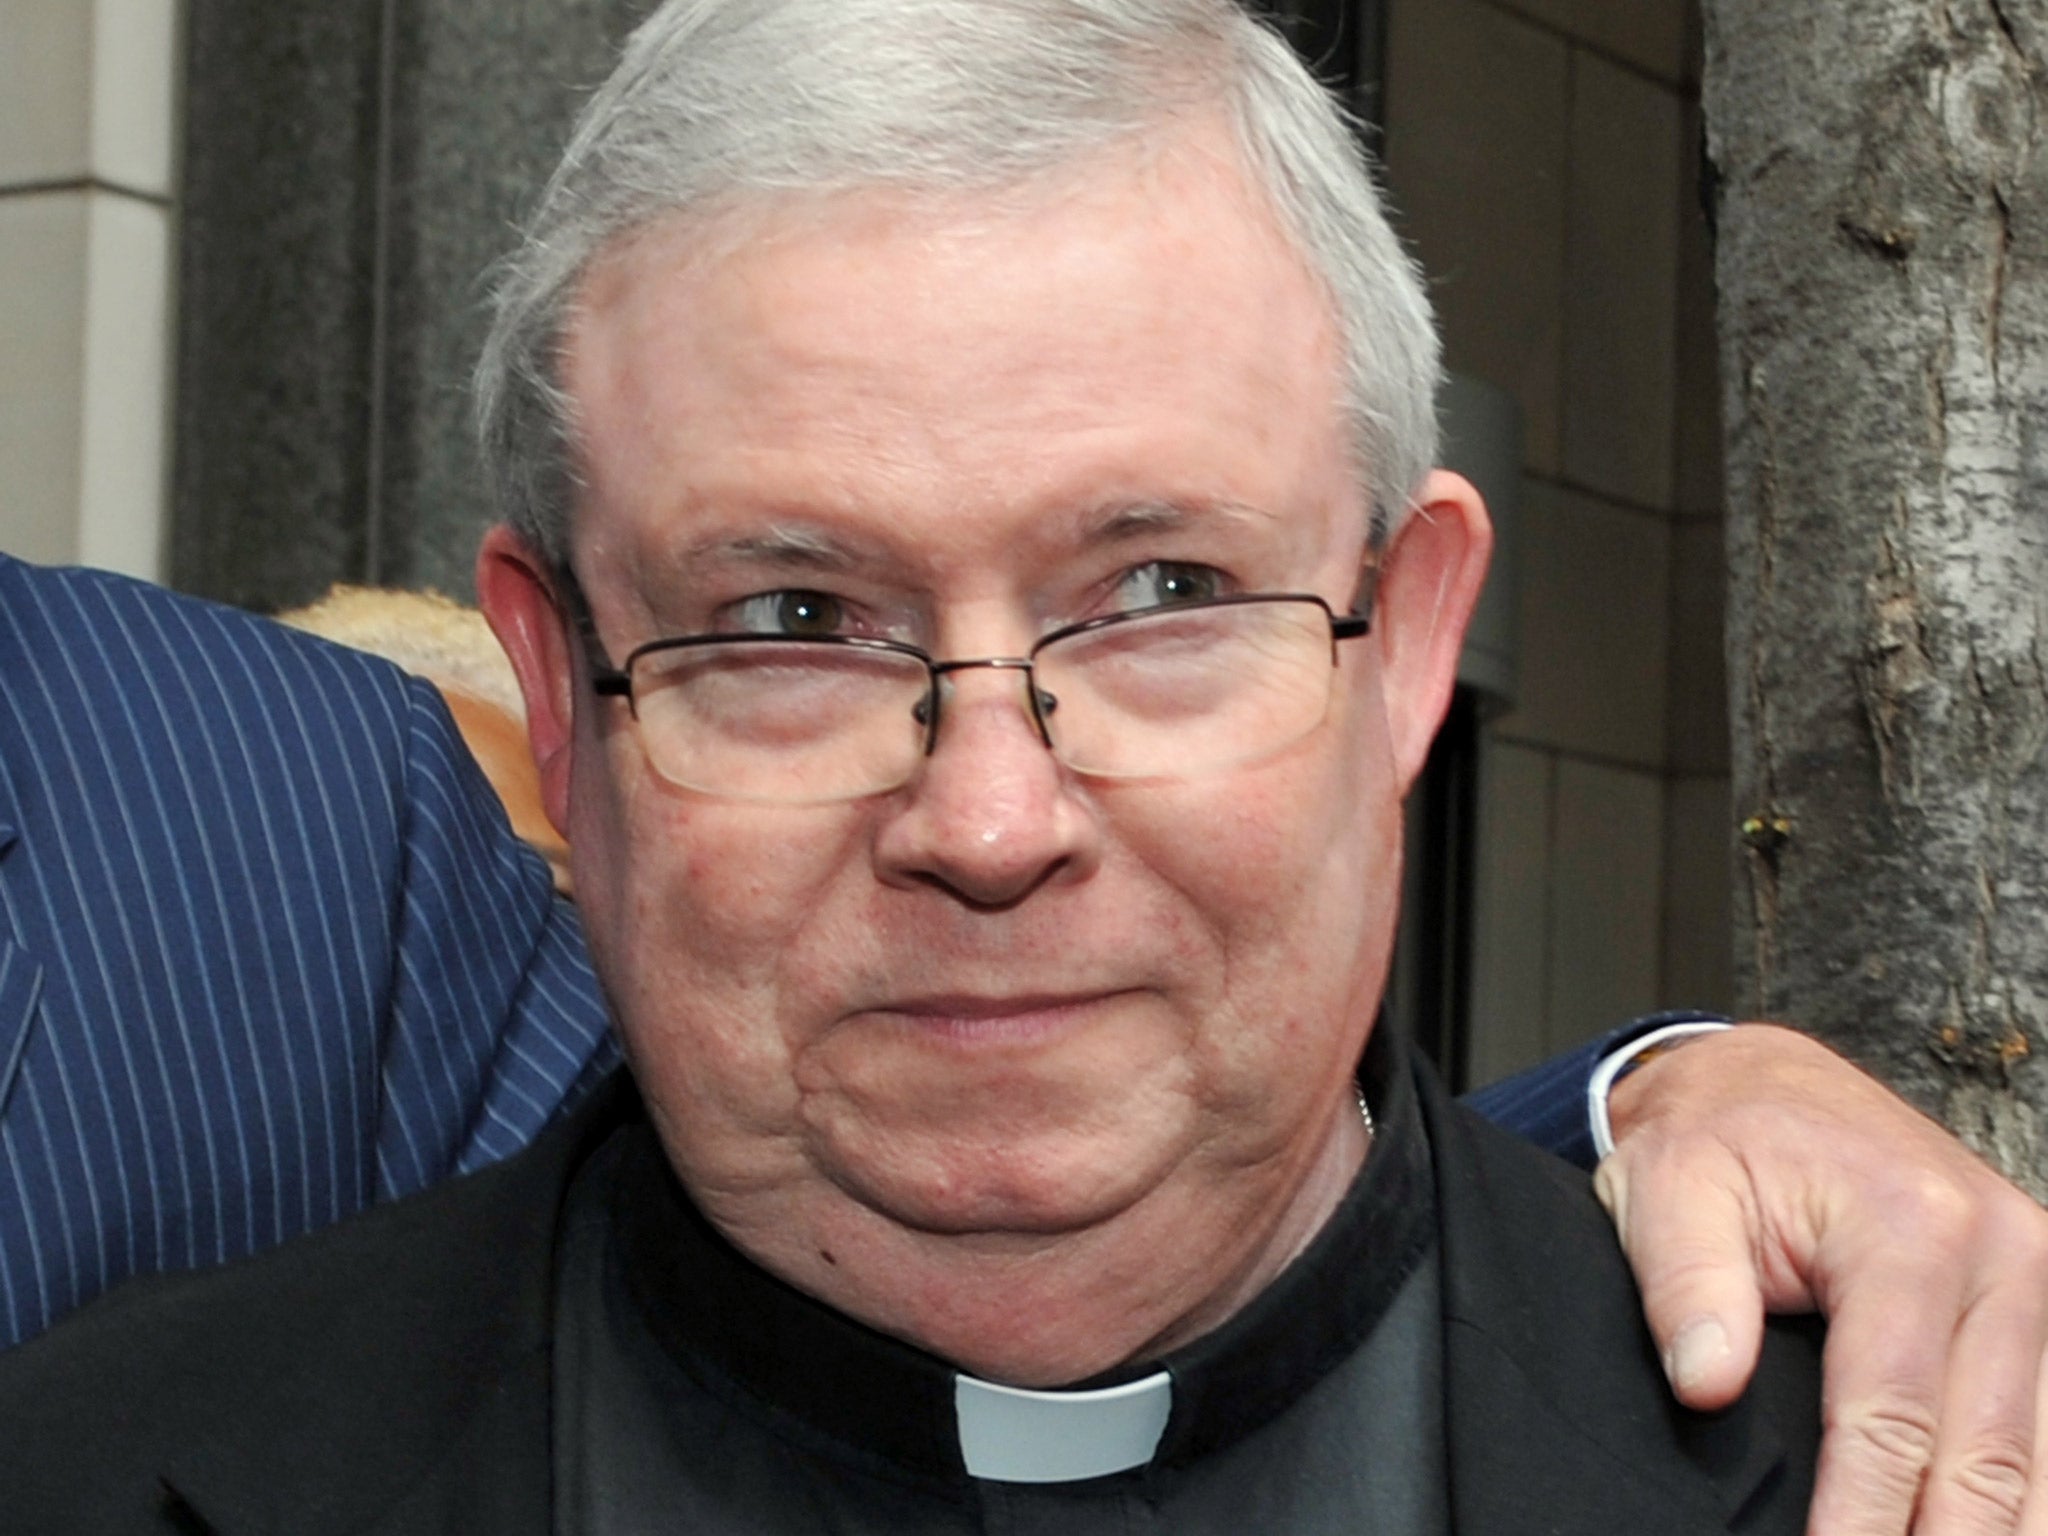 In 2011, Monsignor William Lynn became the first official to be convicted in the United States of covering up abuses by other priests (Getty)